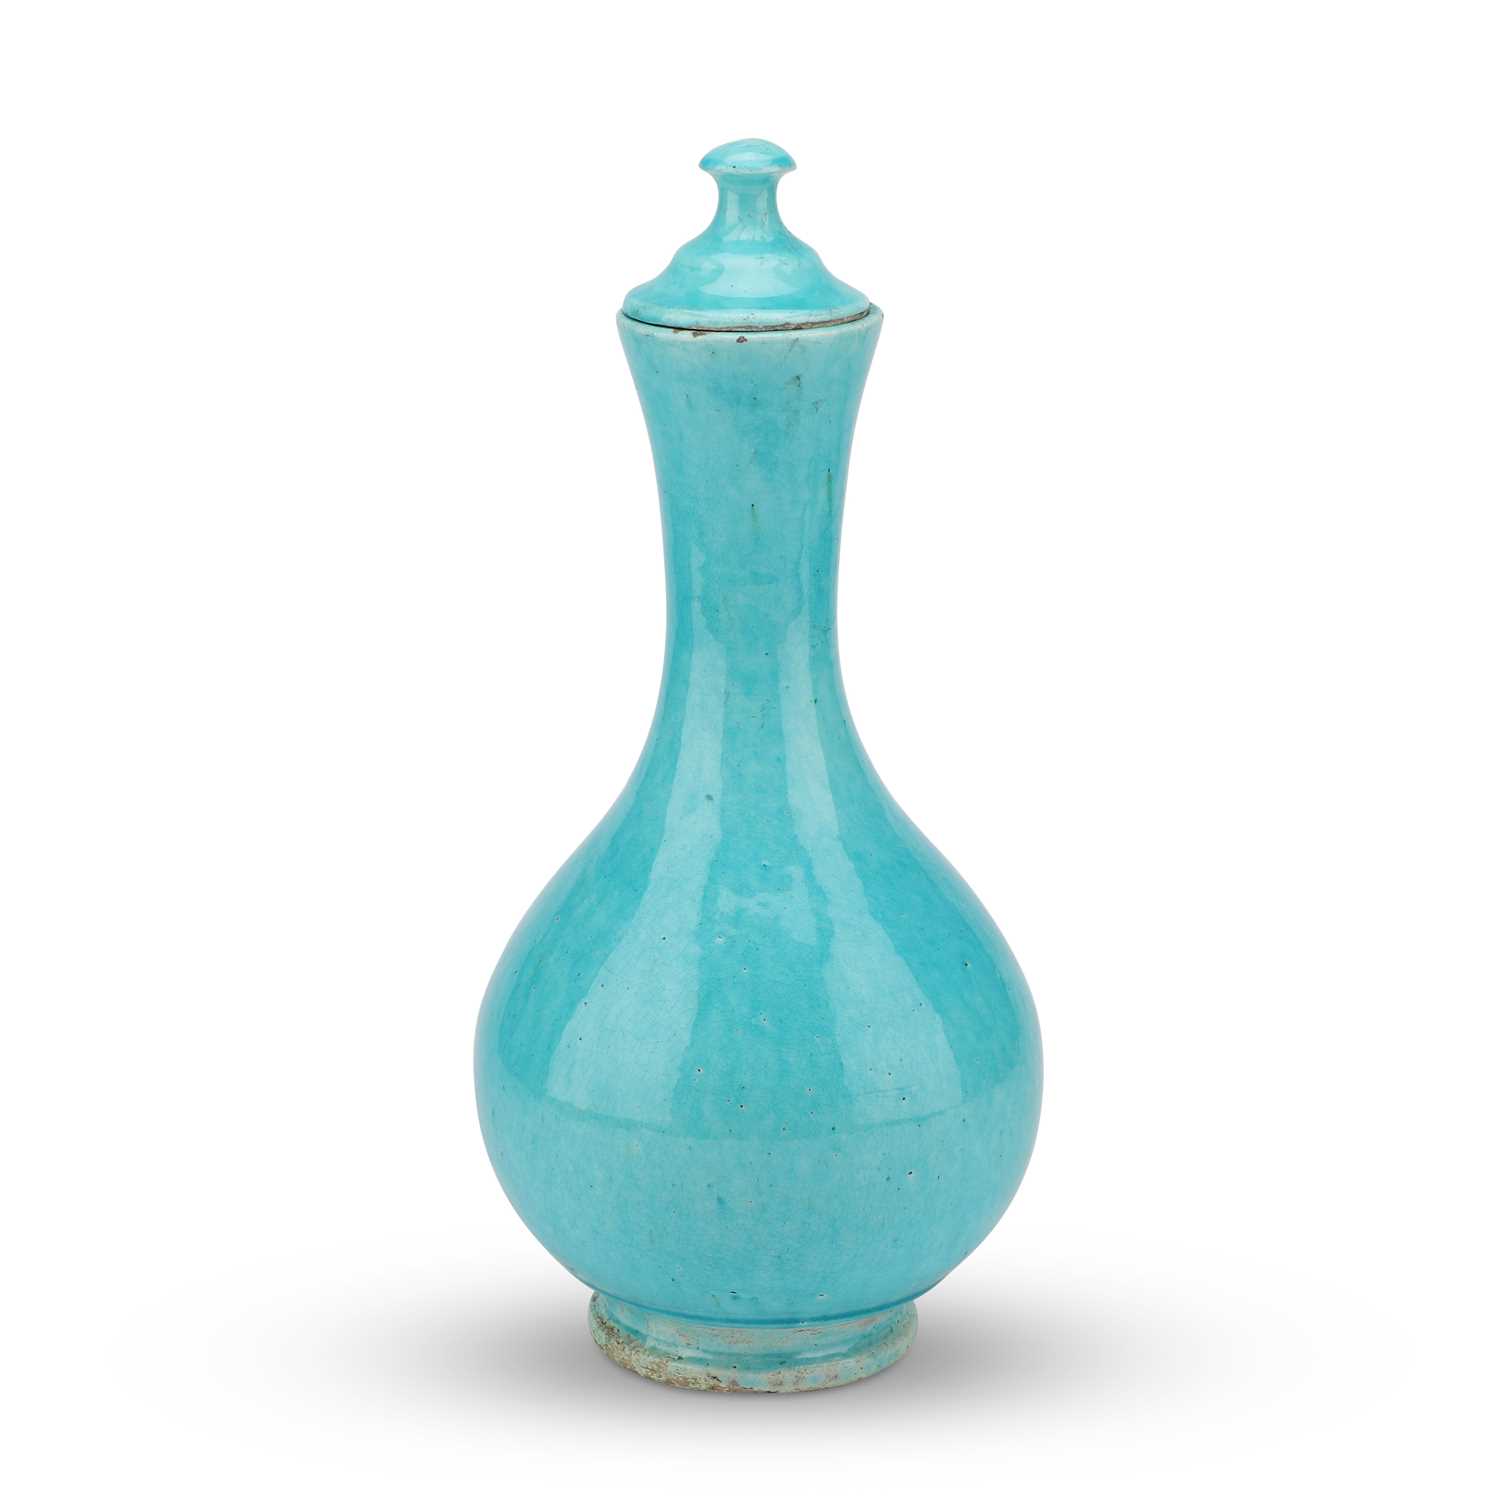 Lot 160 - A TURQUOISE-GLAZED VASE AND COVER